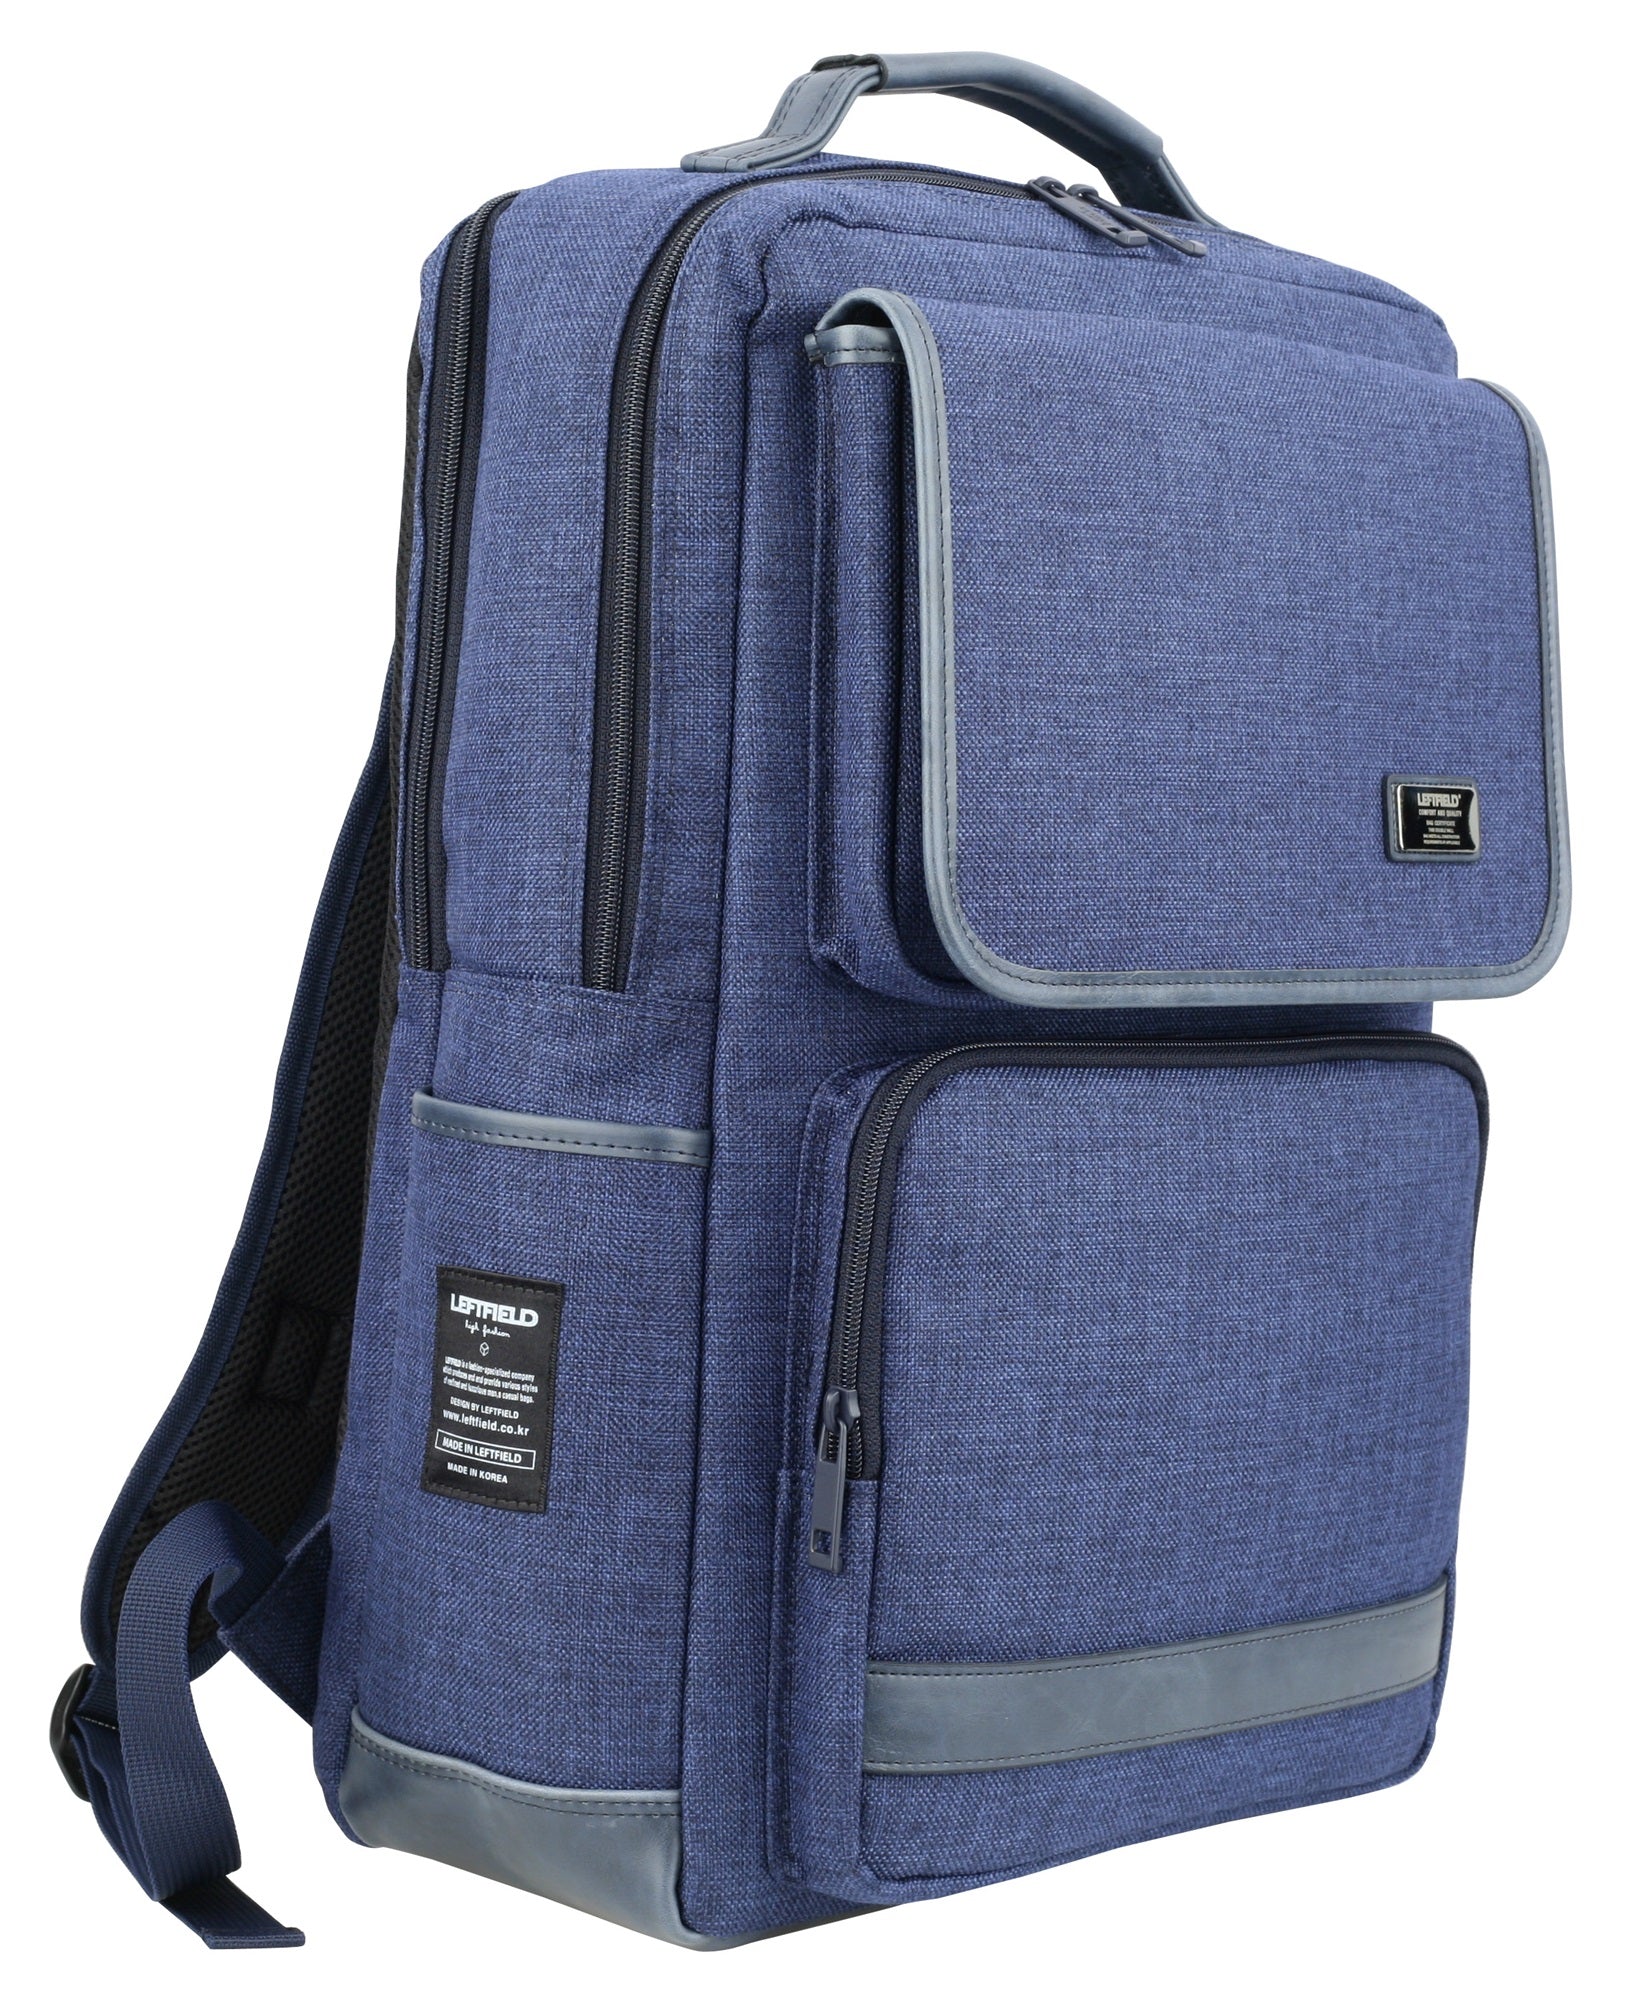 Blue Canvas Casual Laptop Daypack School Backpacks